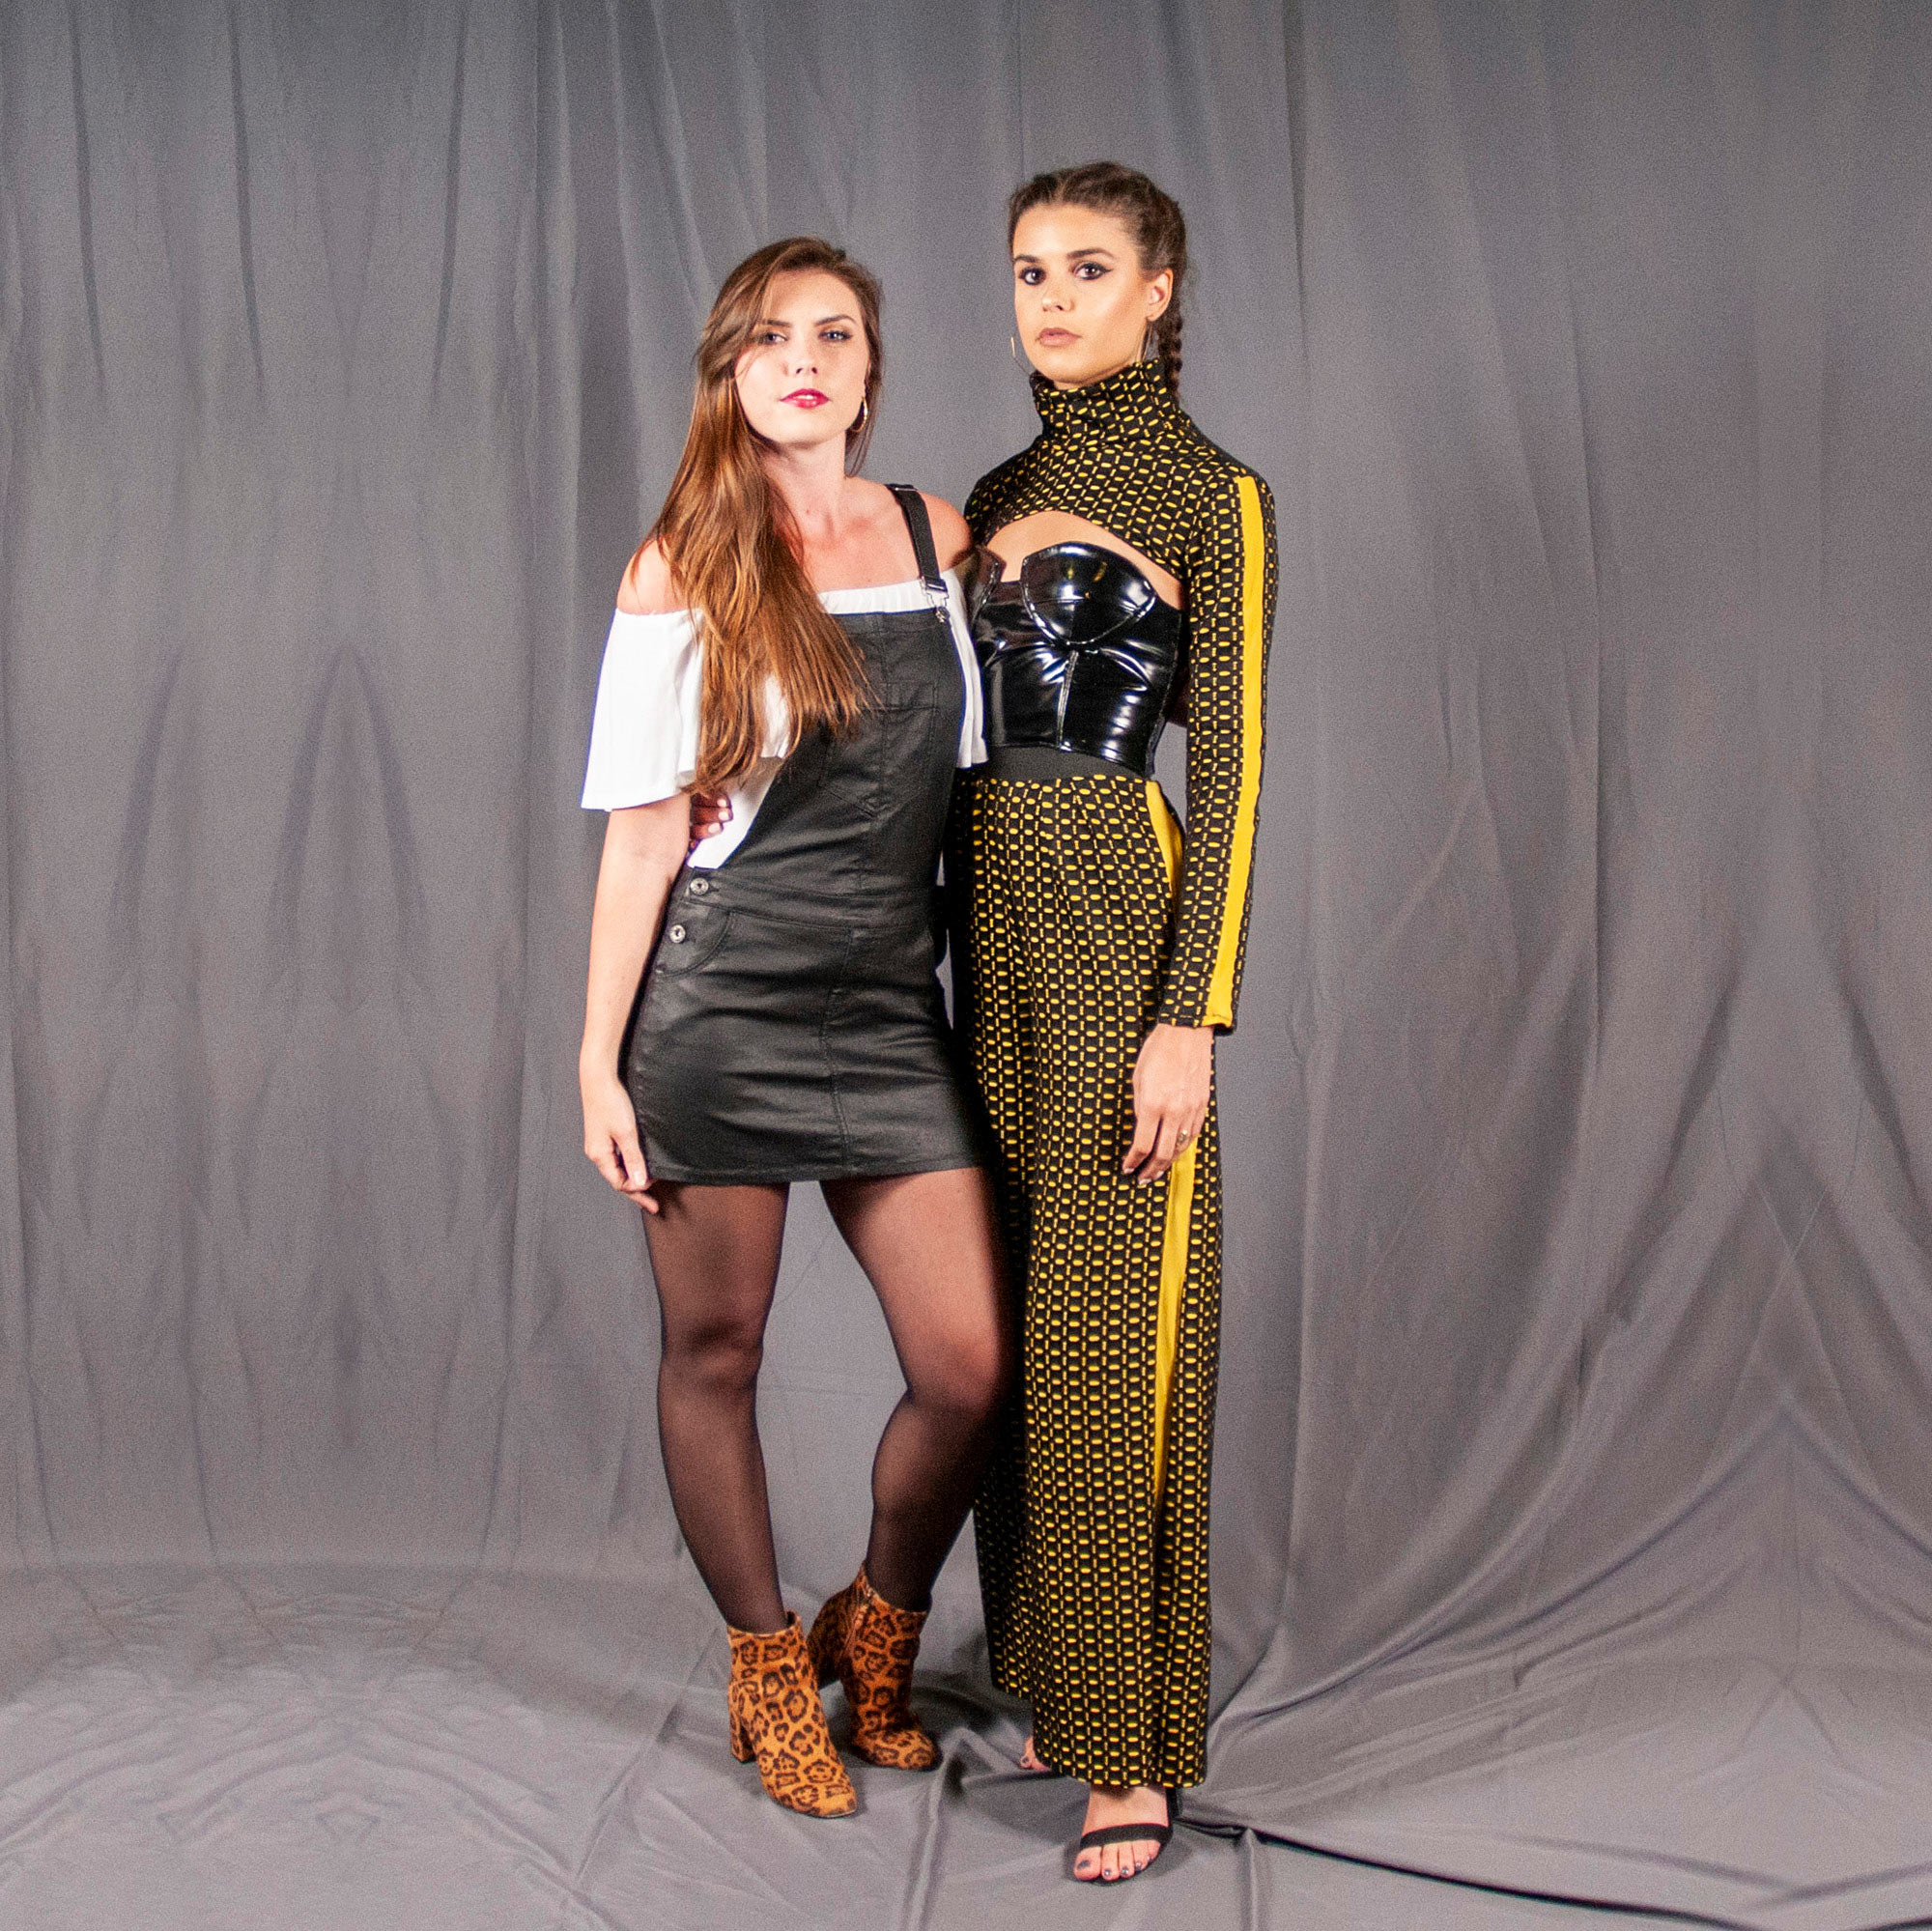 Designer and Model posing together at the backstage photo screen.